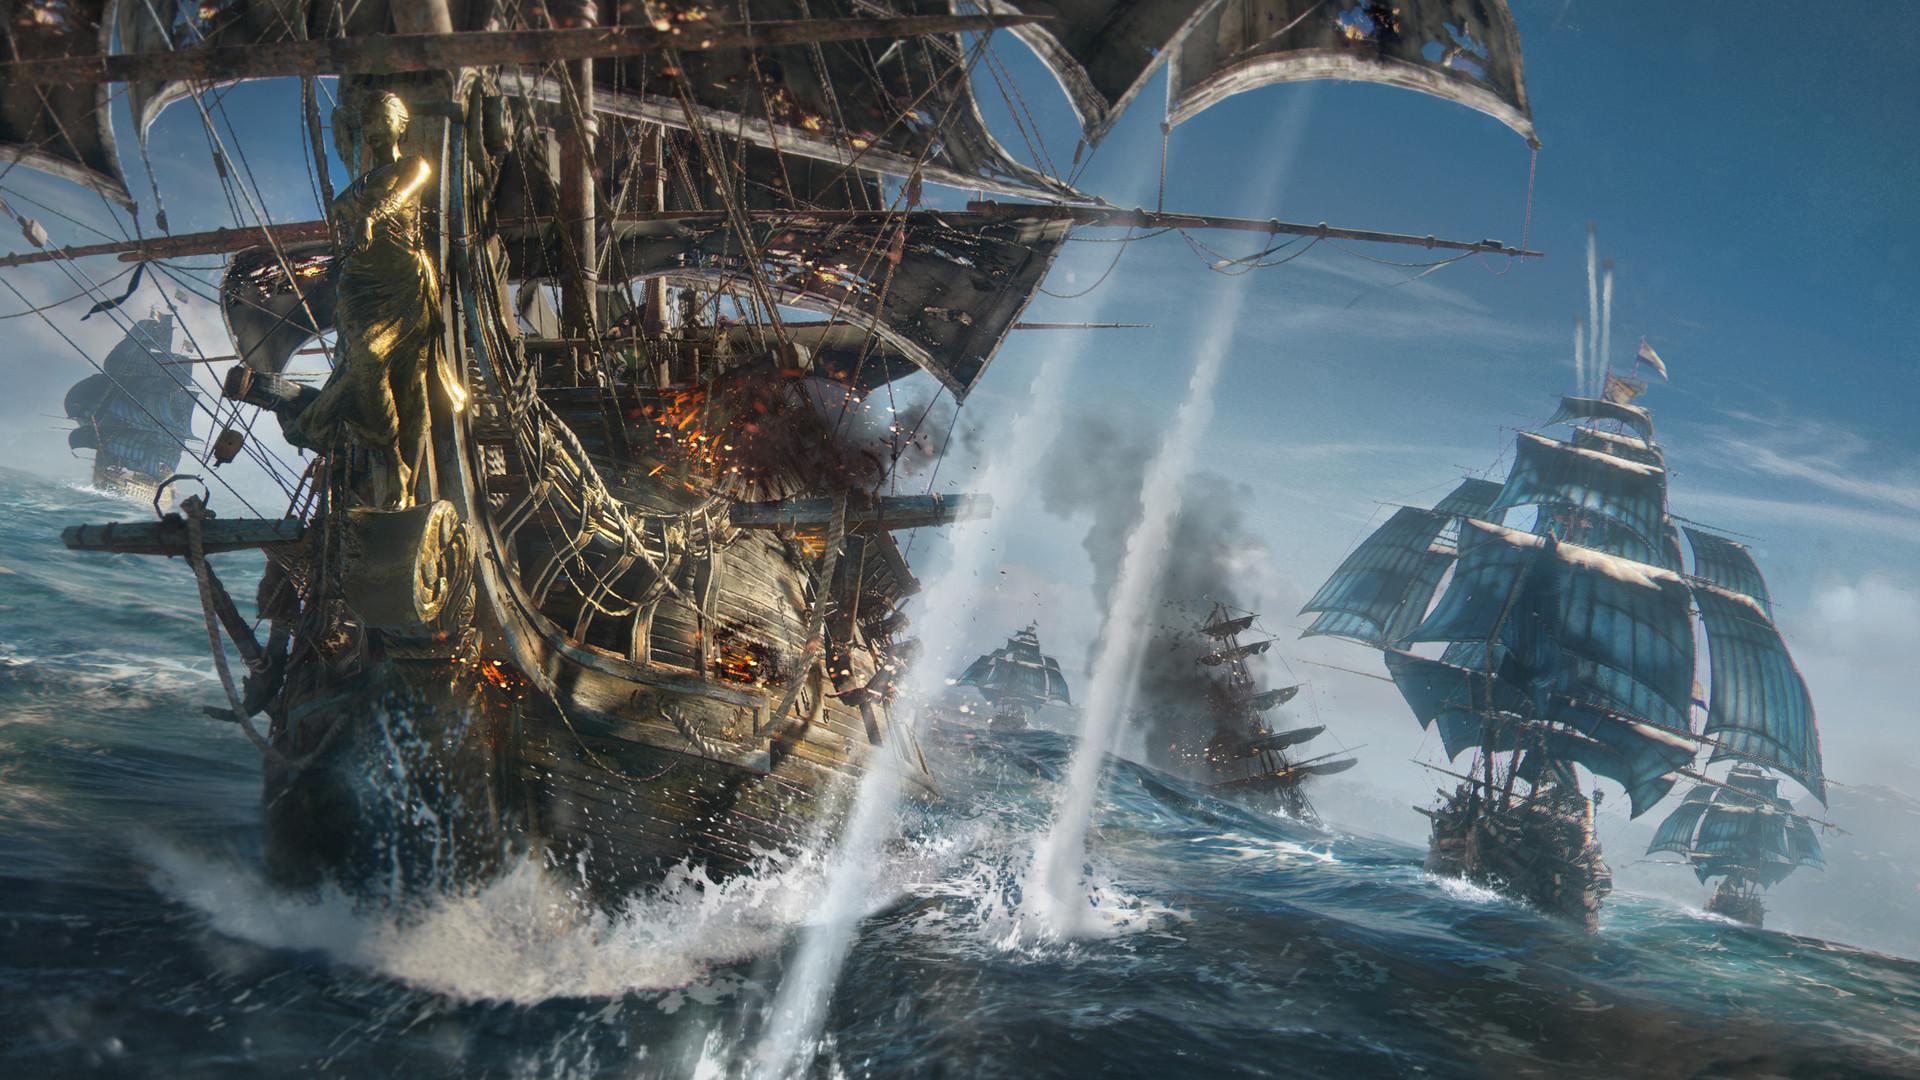 Ubisoft's Skull & Bones has announced this November, with multiple insiders claims News 24